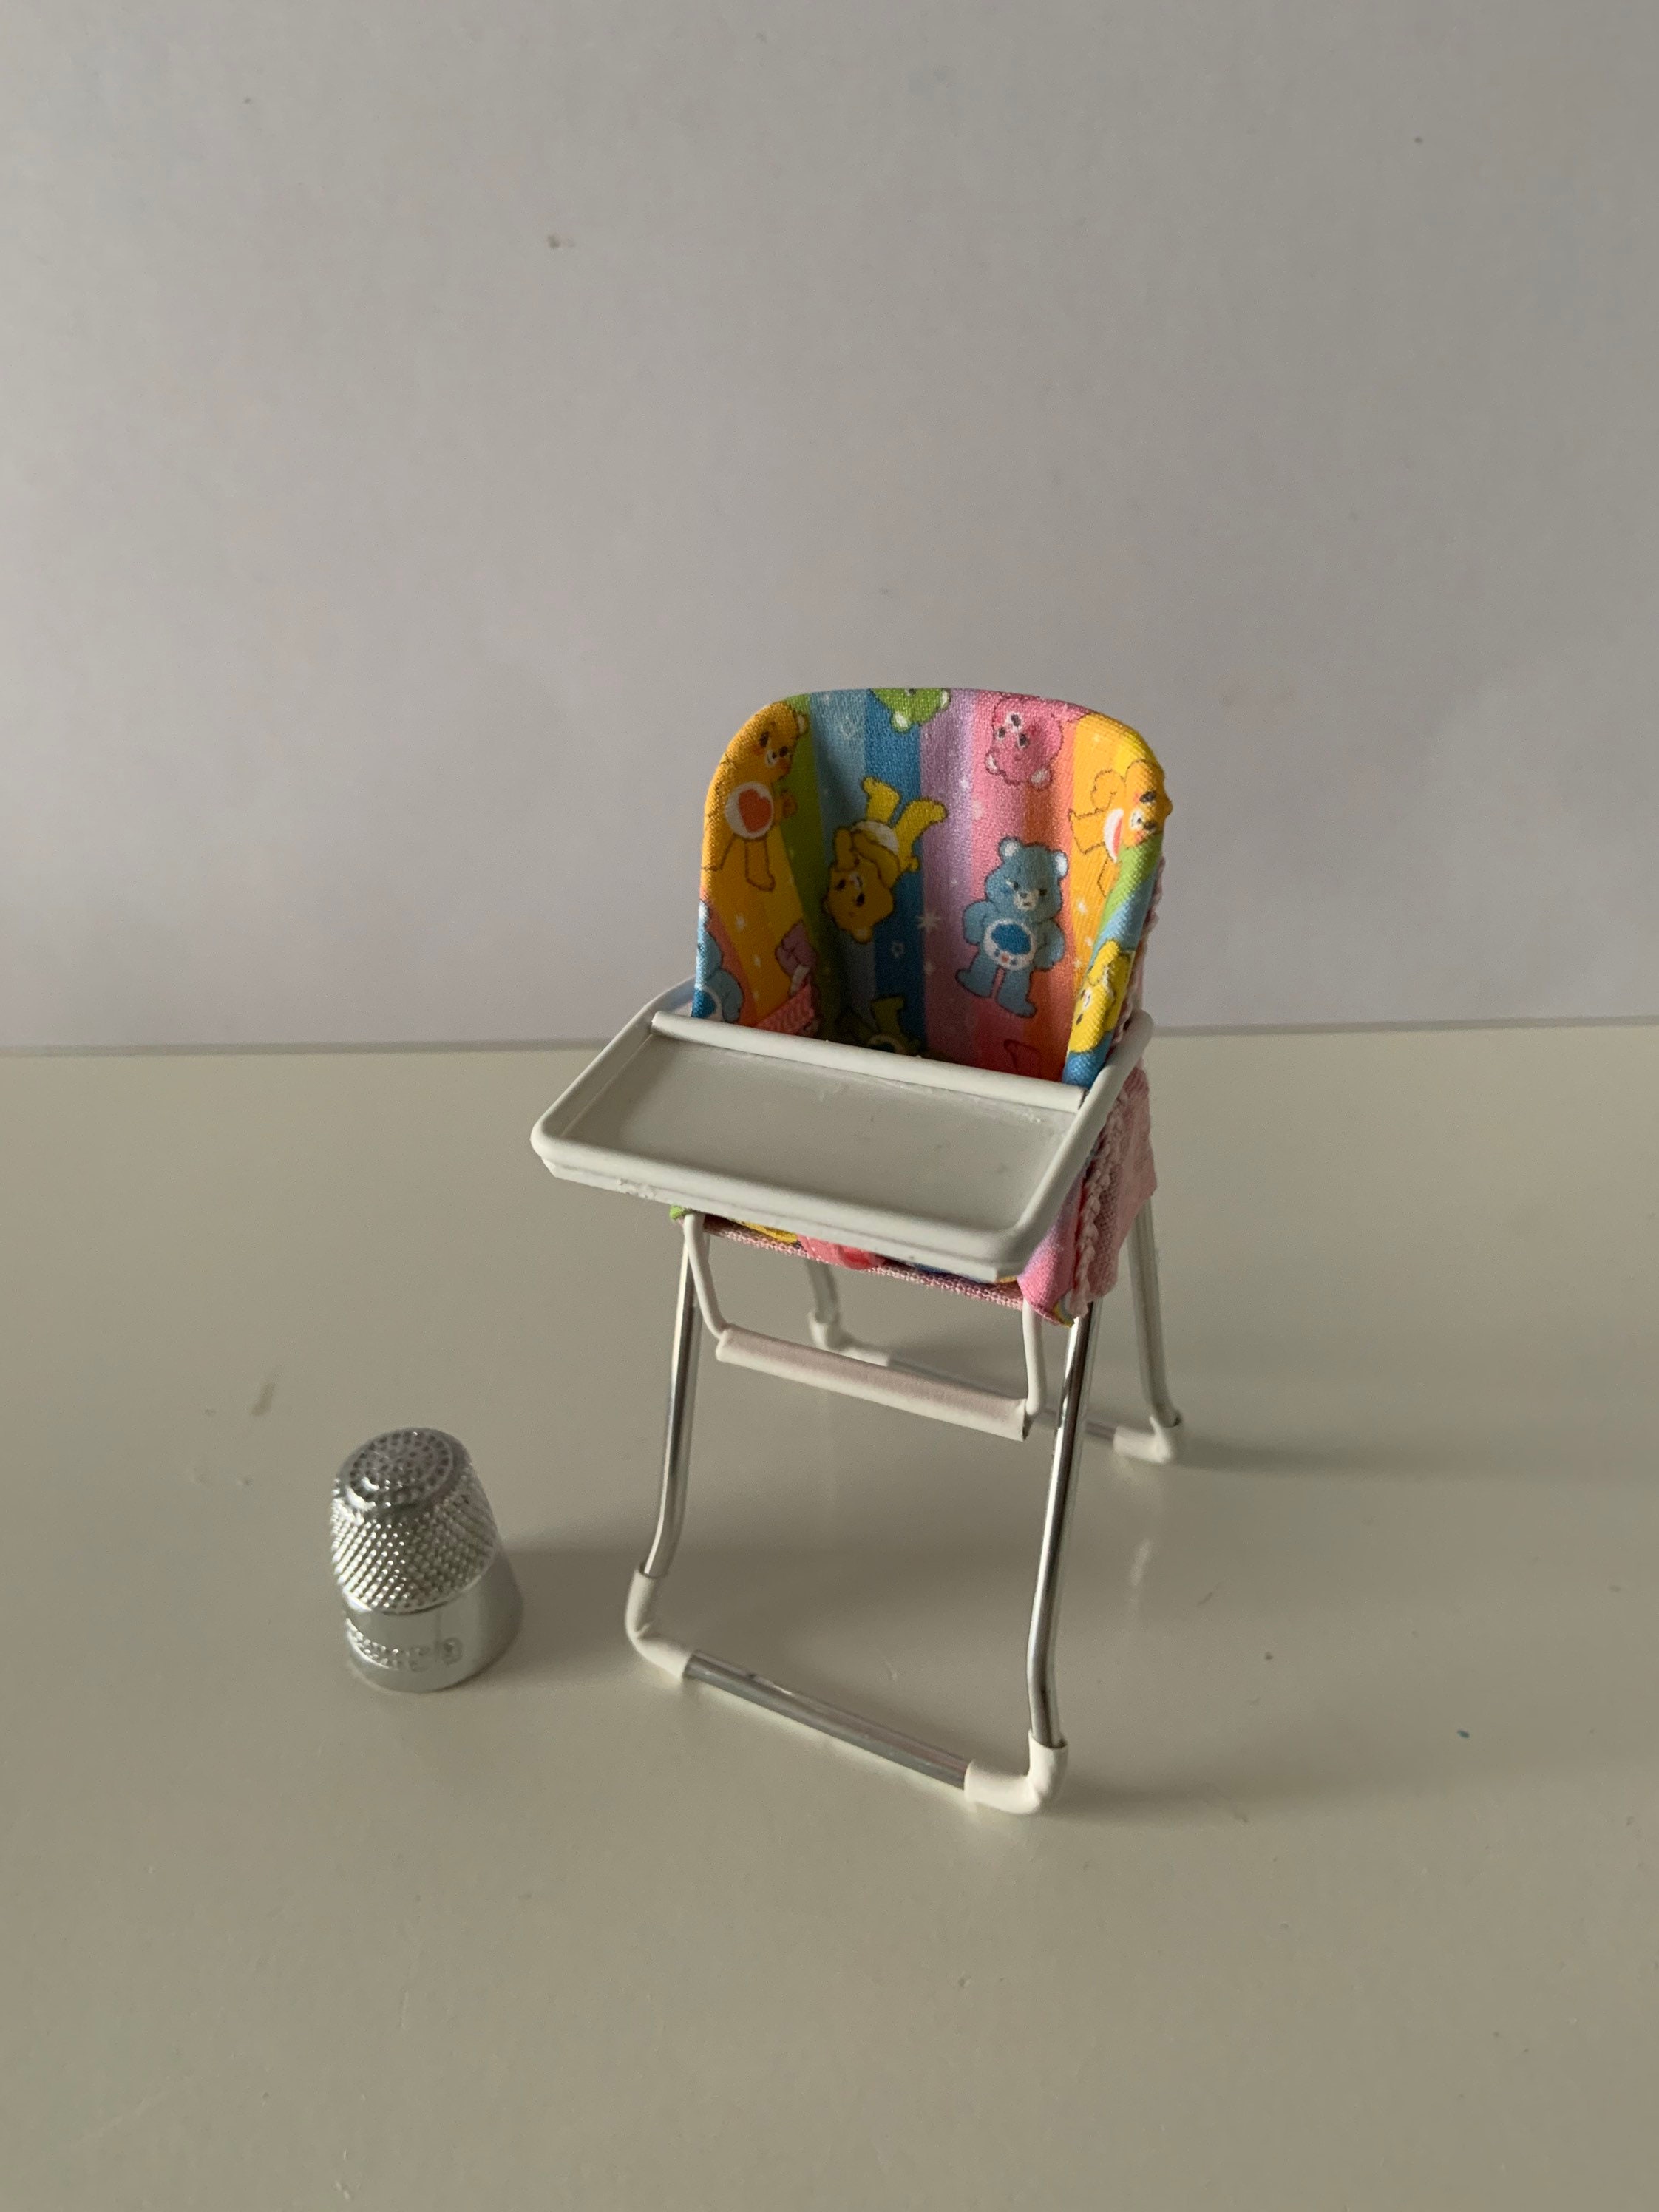 MISSION HIGH CHAIR 1:12 SCALE DOLLHOUSE BABY MINIATURES Heirloom Collection 